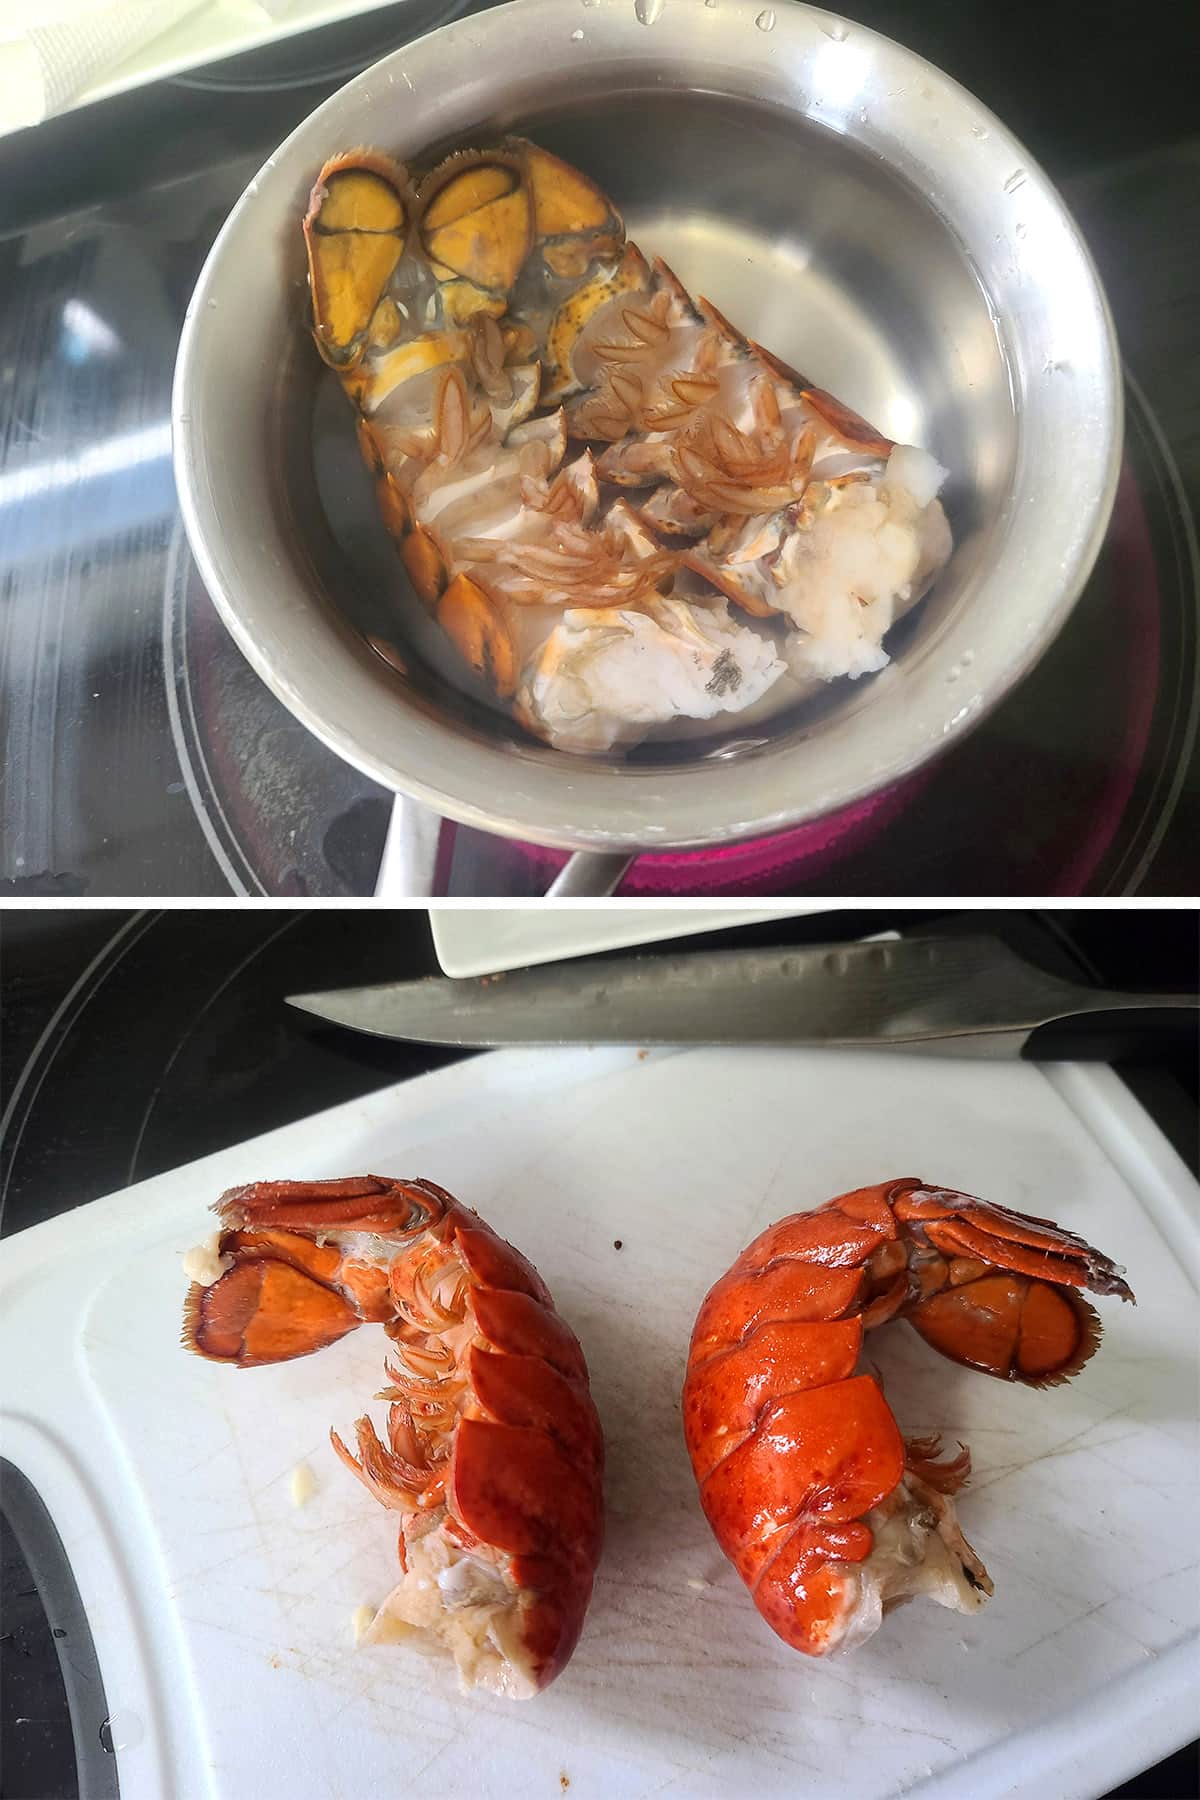 Two mini lobster tails in a small pot, then the cooked lobster on a cutting board.